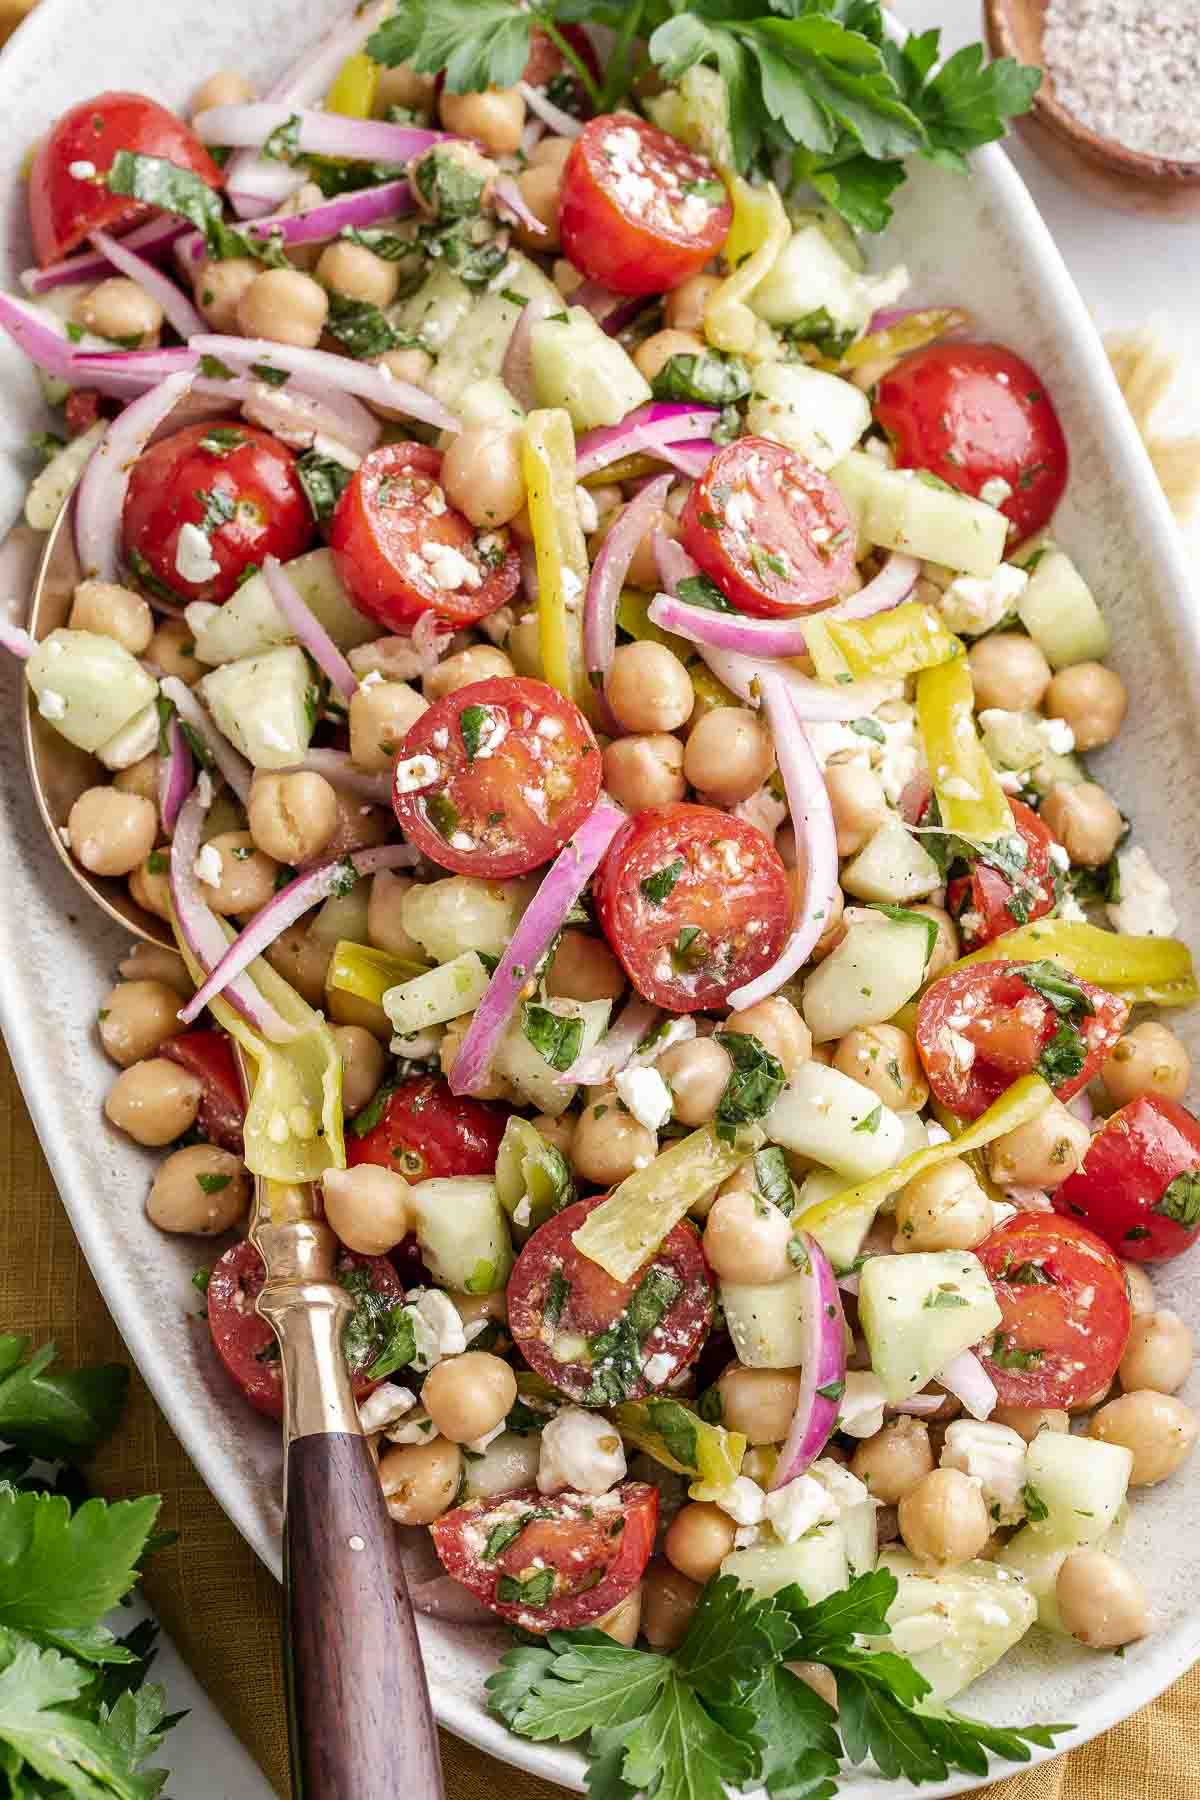 Tossed Mediterranean chickpea salad on oval serving platter with tongs.